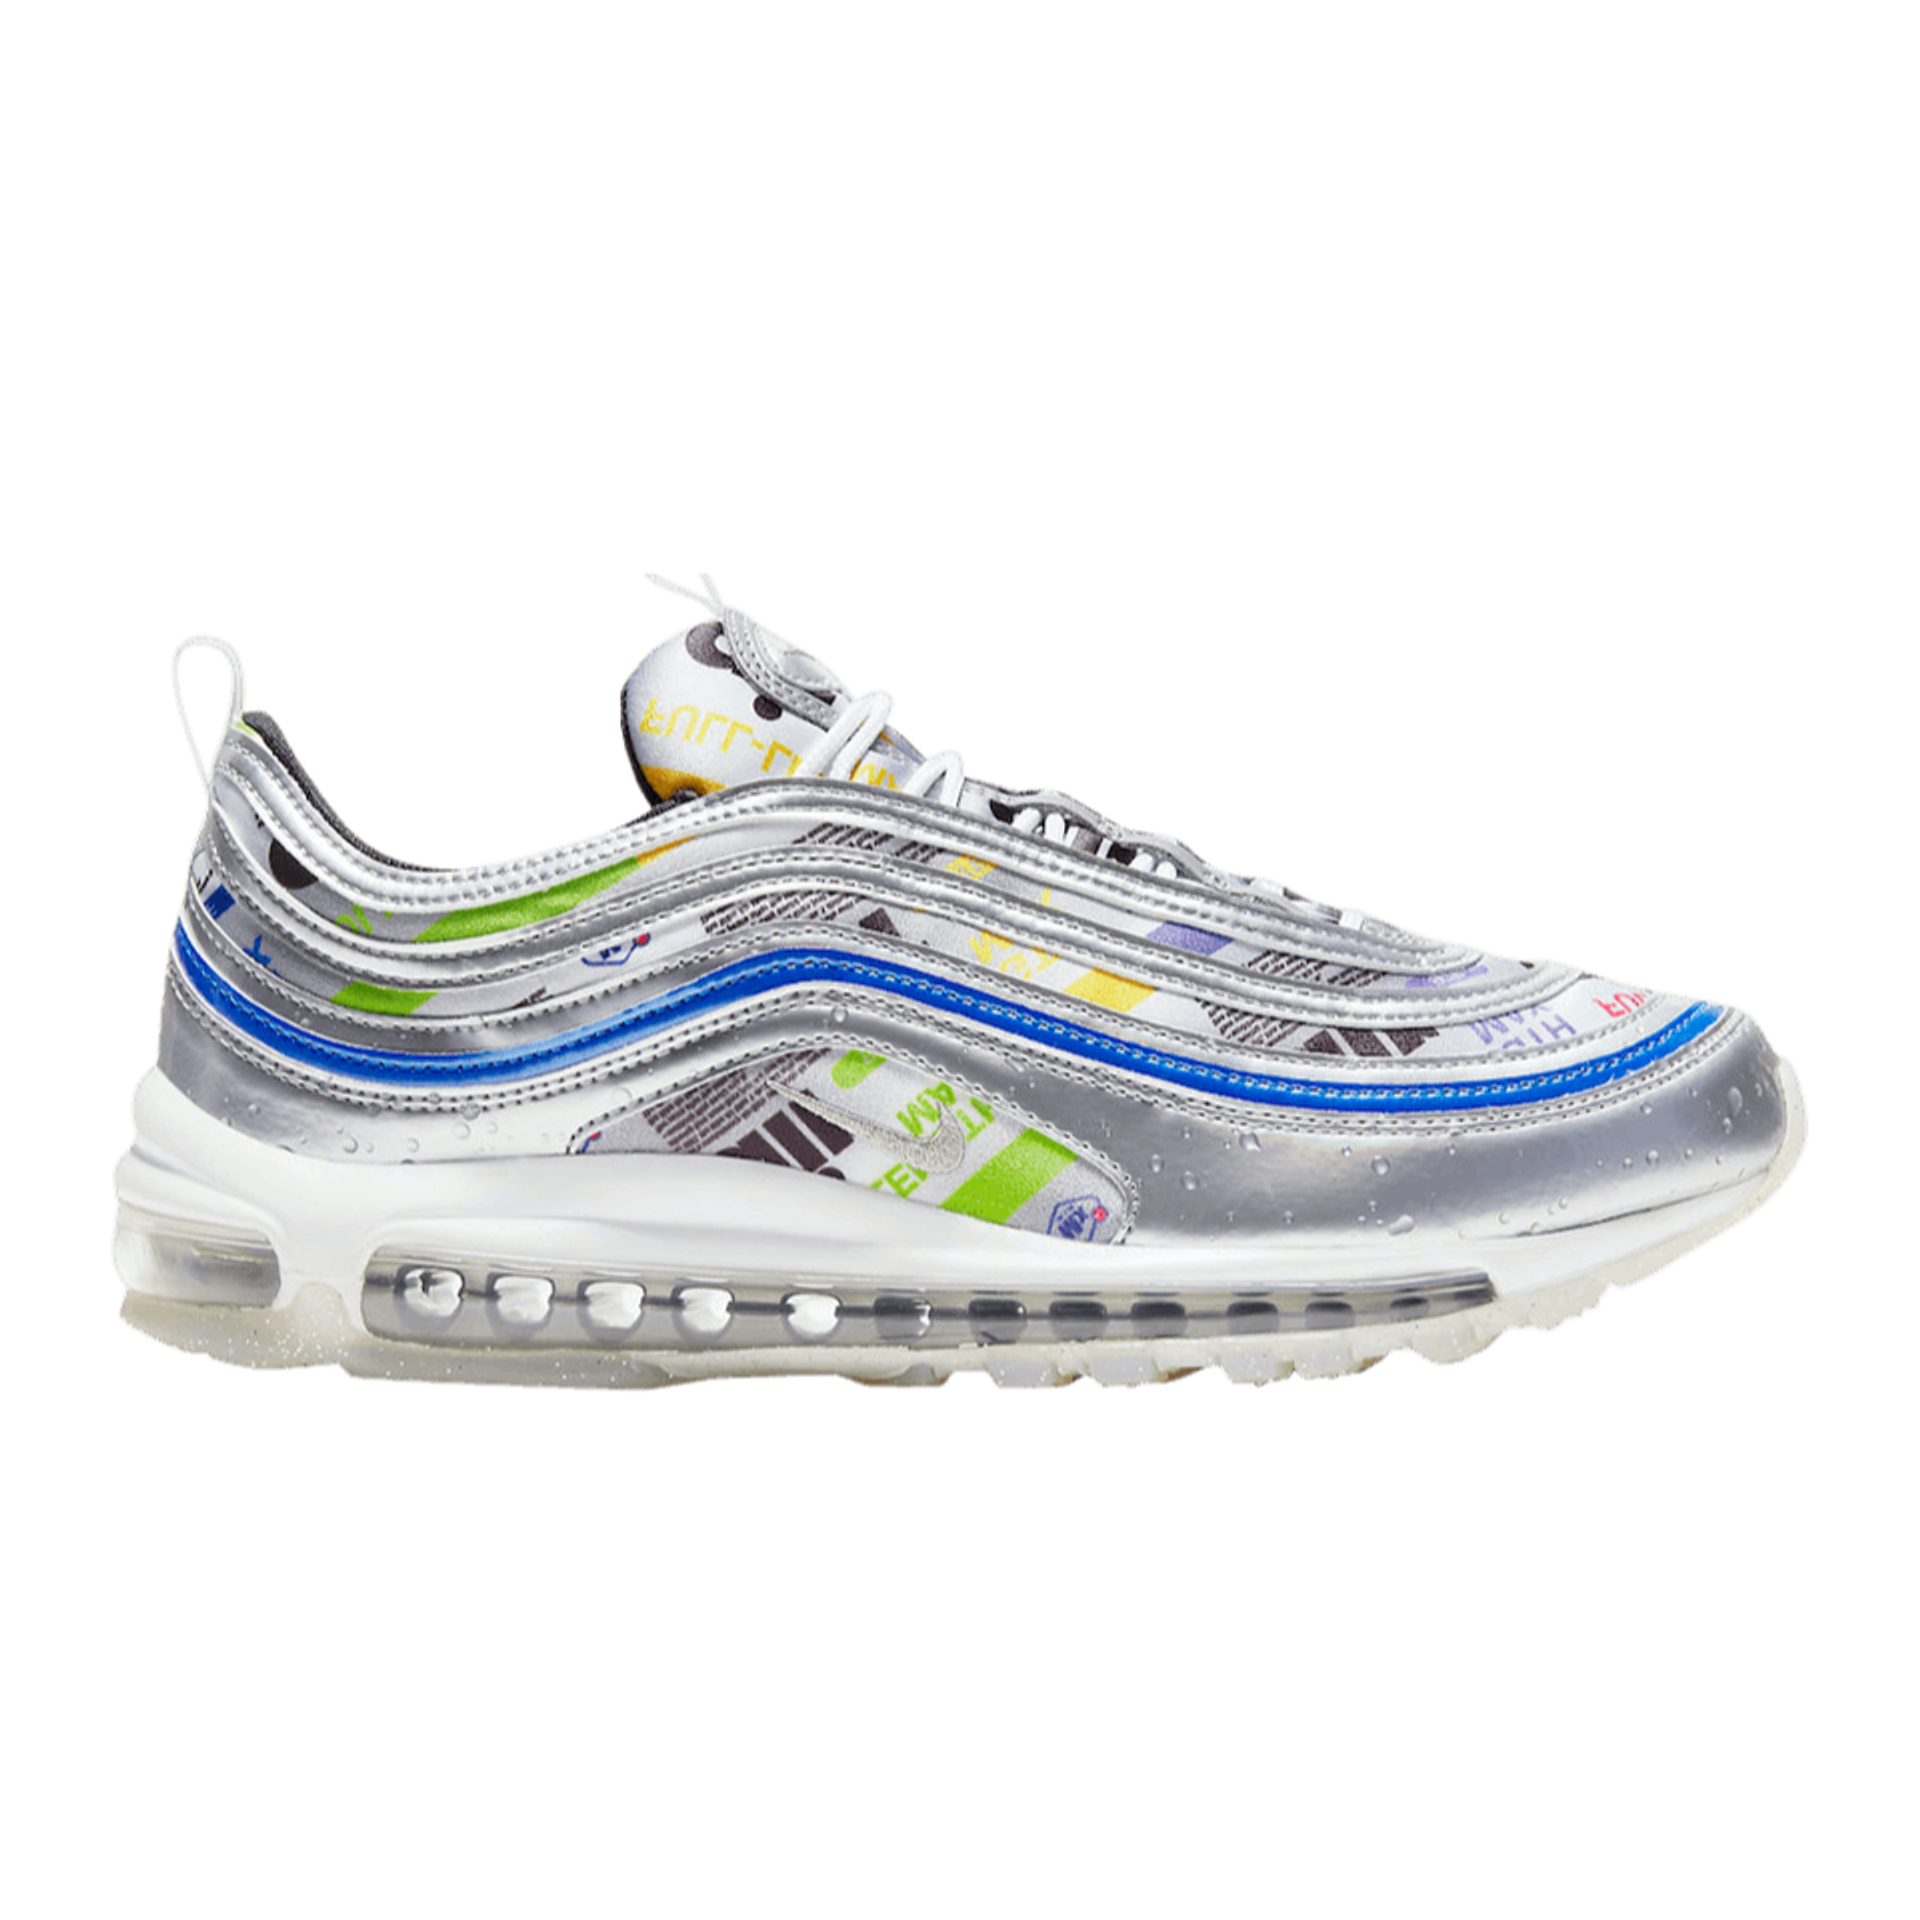 Nike Air Max 97 SE 'Energy Jelly'